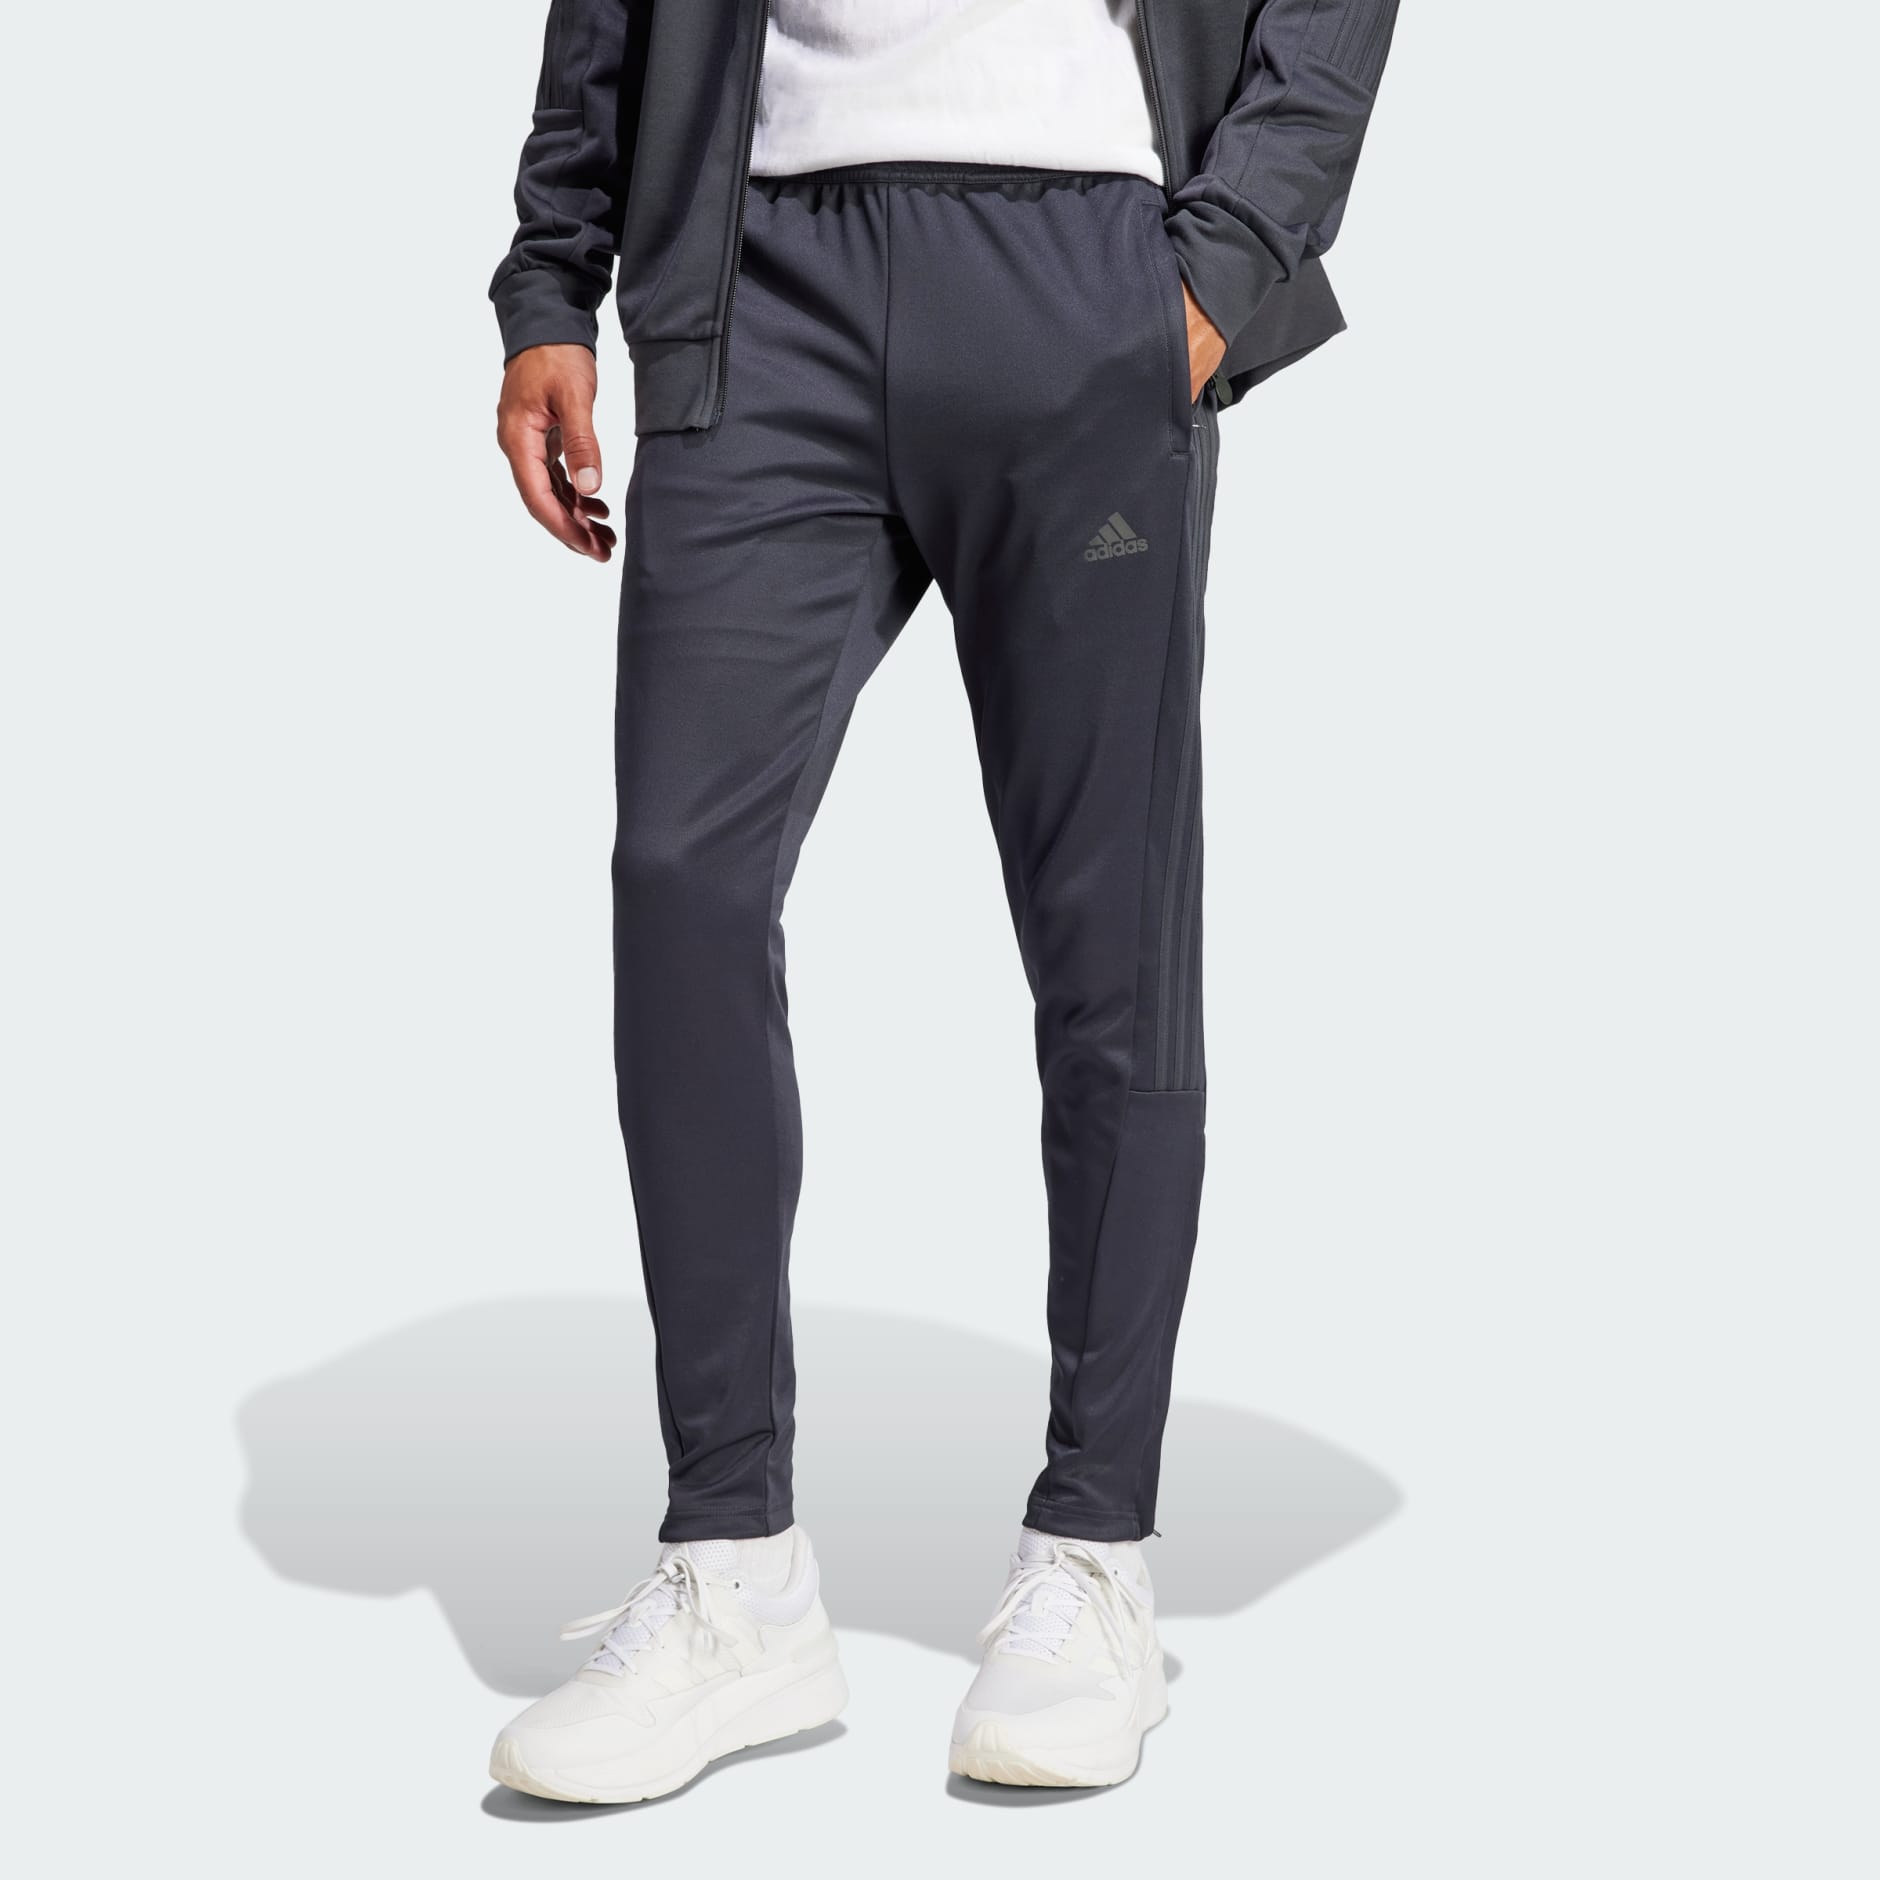 Adidas Basketball Snap Pants » Buy online now!